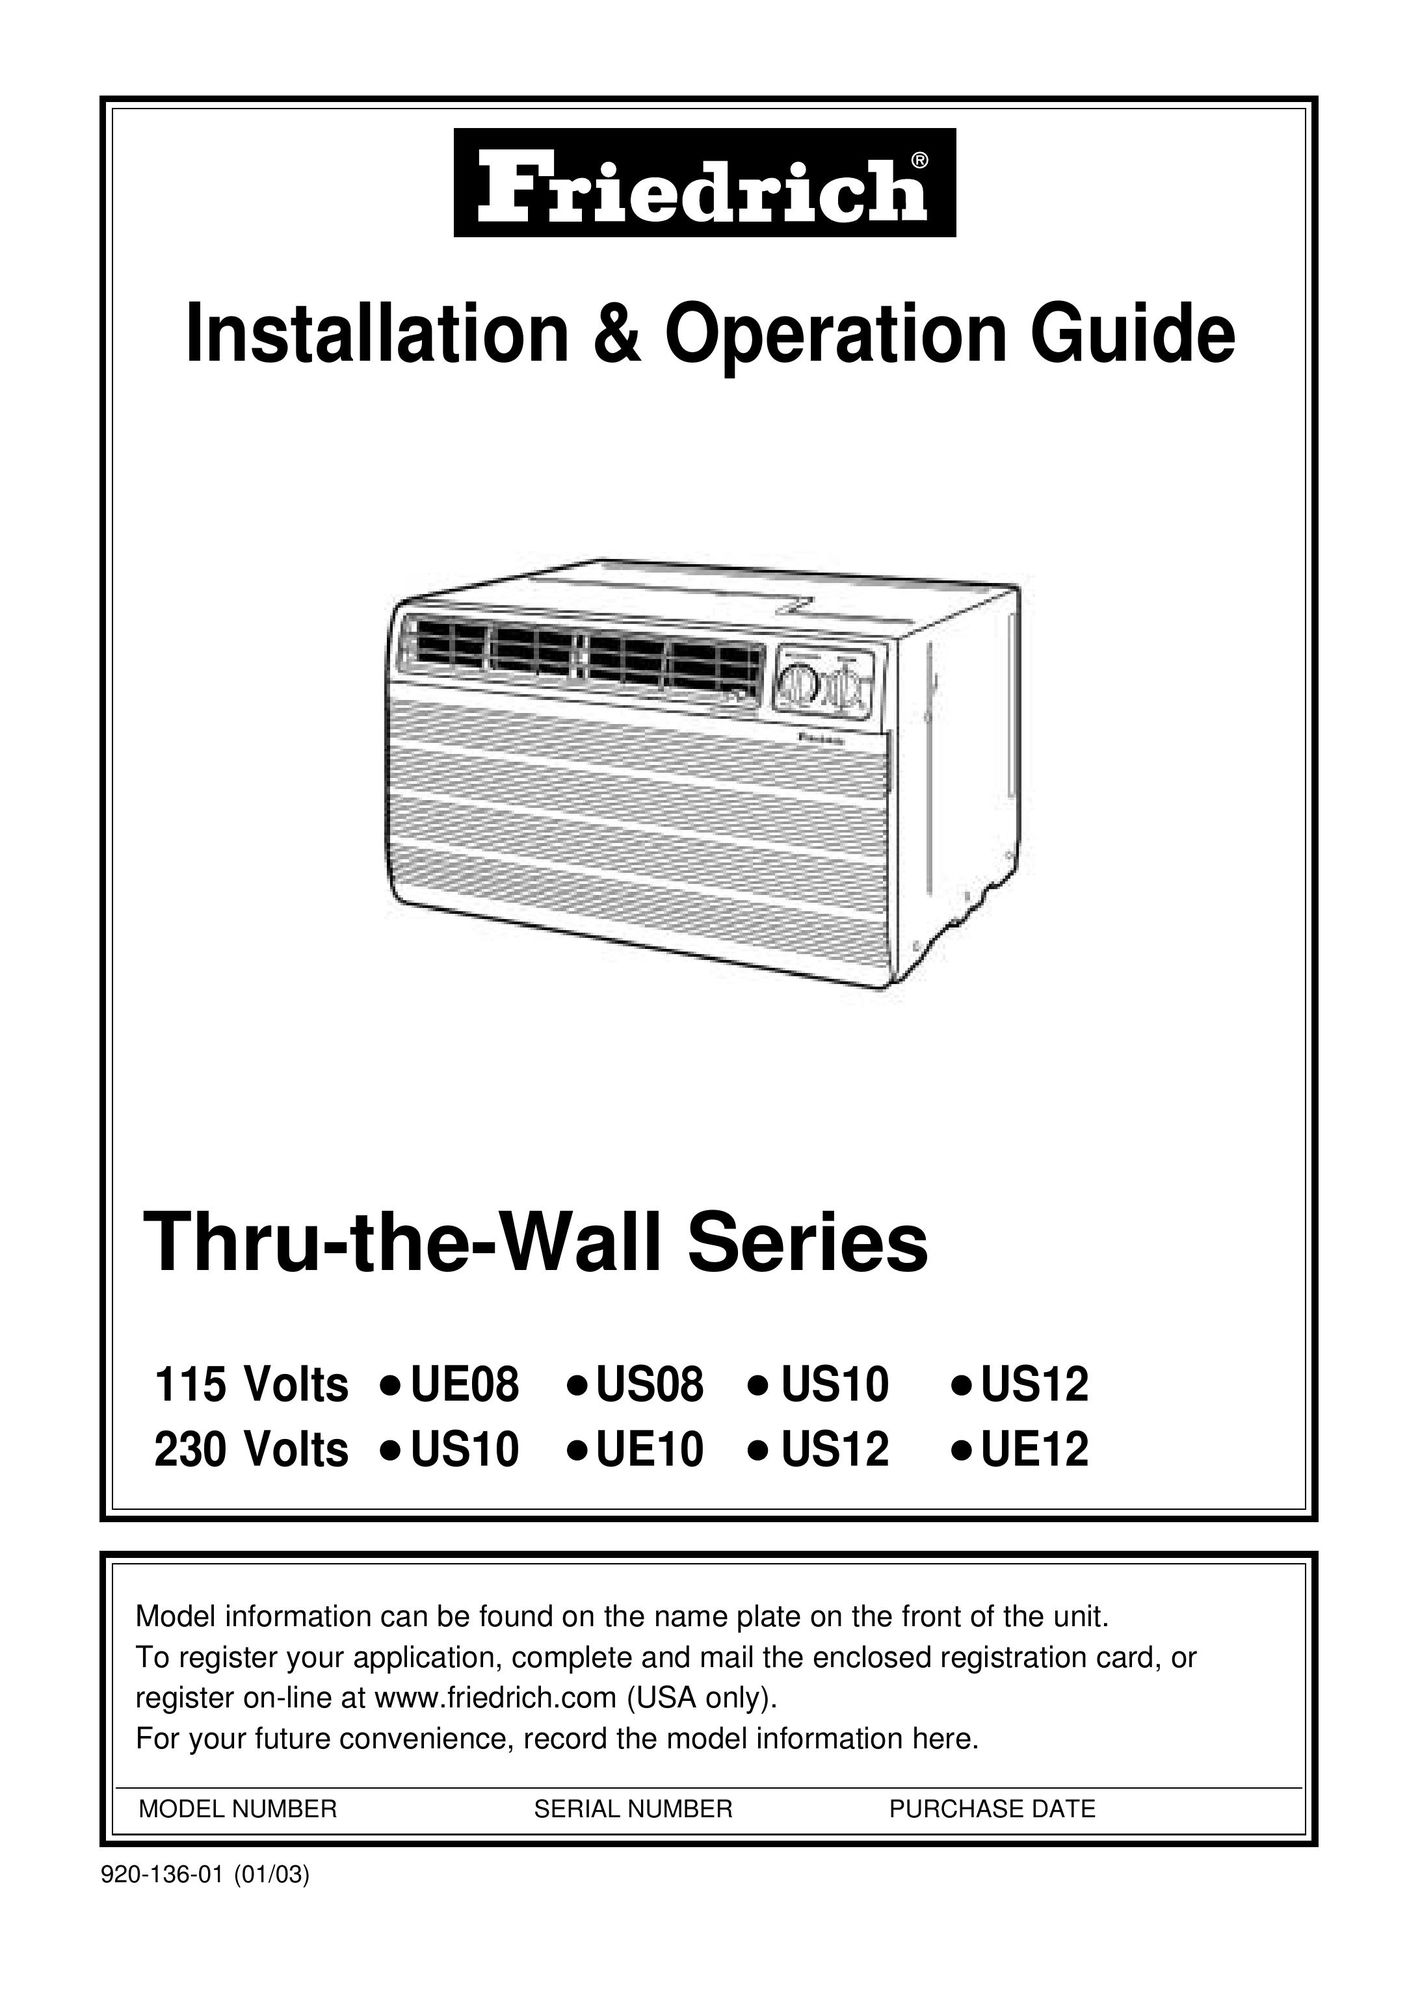 Friedrich 115 Volts US12 Air Conditioner User Manual